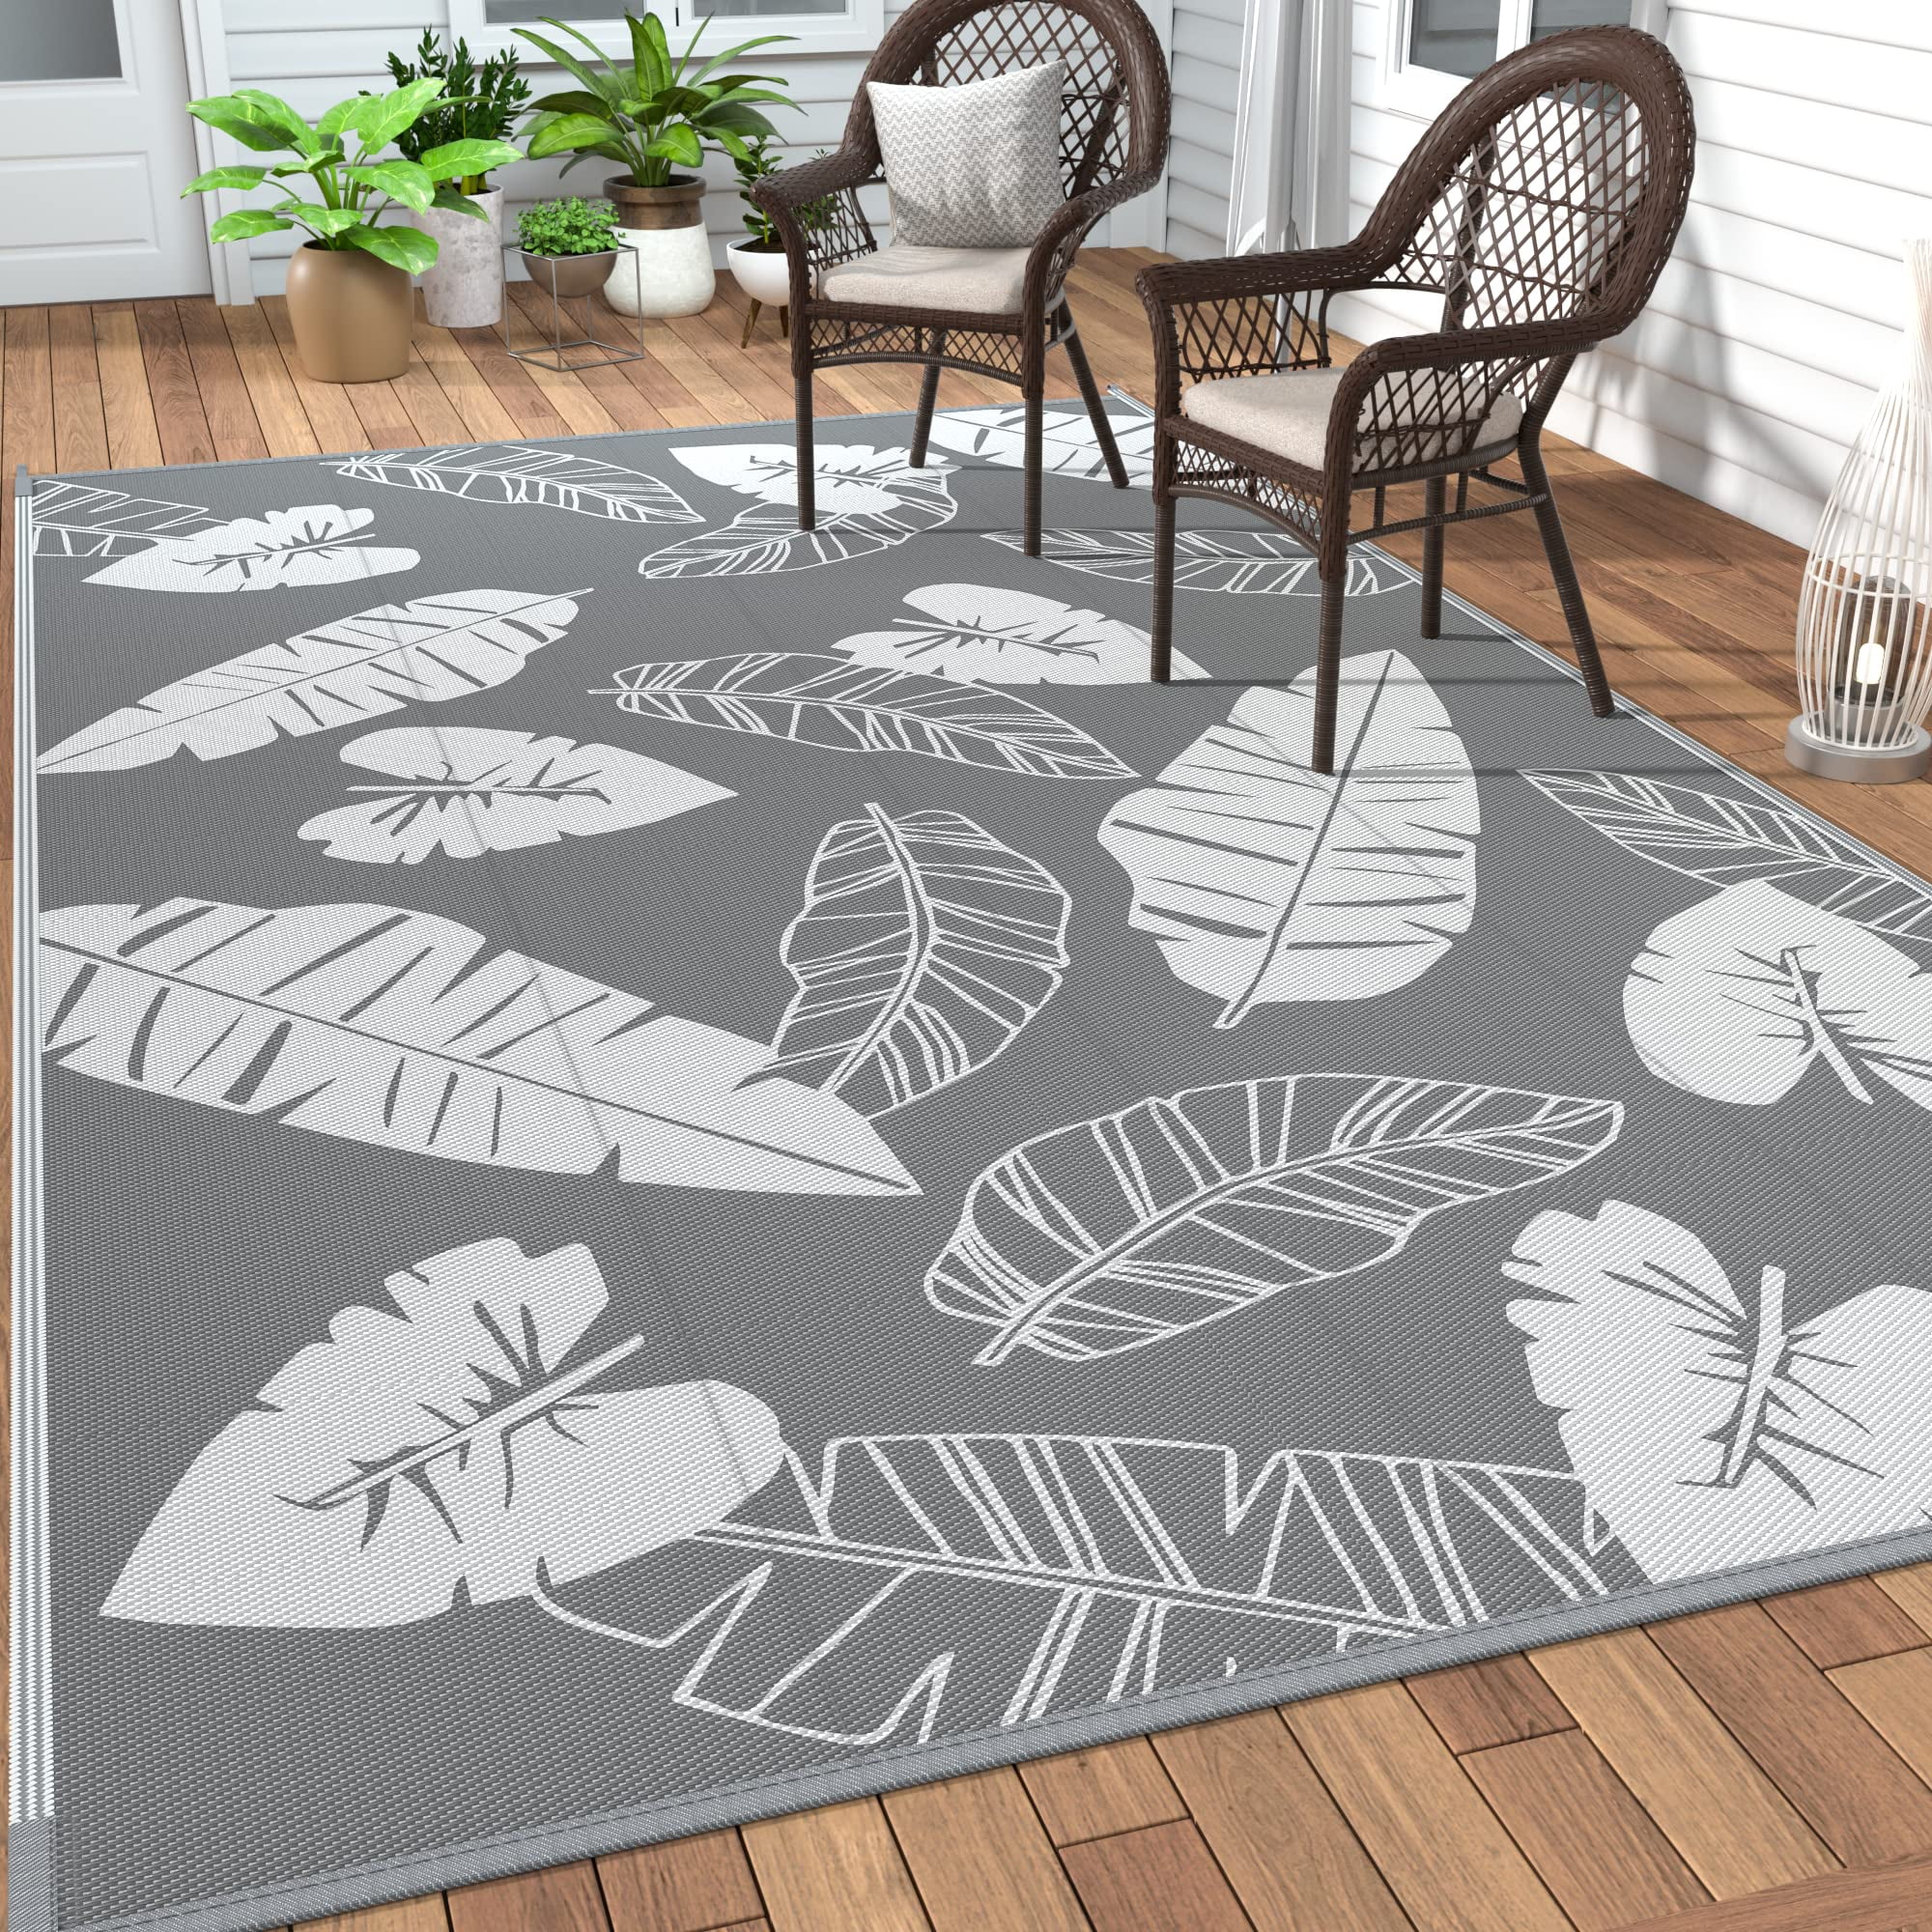 Waterproof Outdoor Rugs for RV Camping Rugs for Outside Your RV Patio Porch – Plastic Straw Rug – Durable Modern Area Rug Large Reversible Floor Mat by Funky Strokes 9' x 12', Black & White 